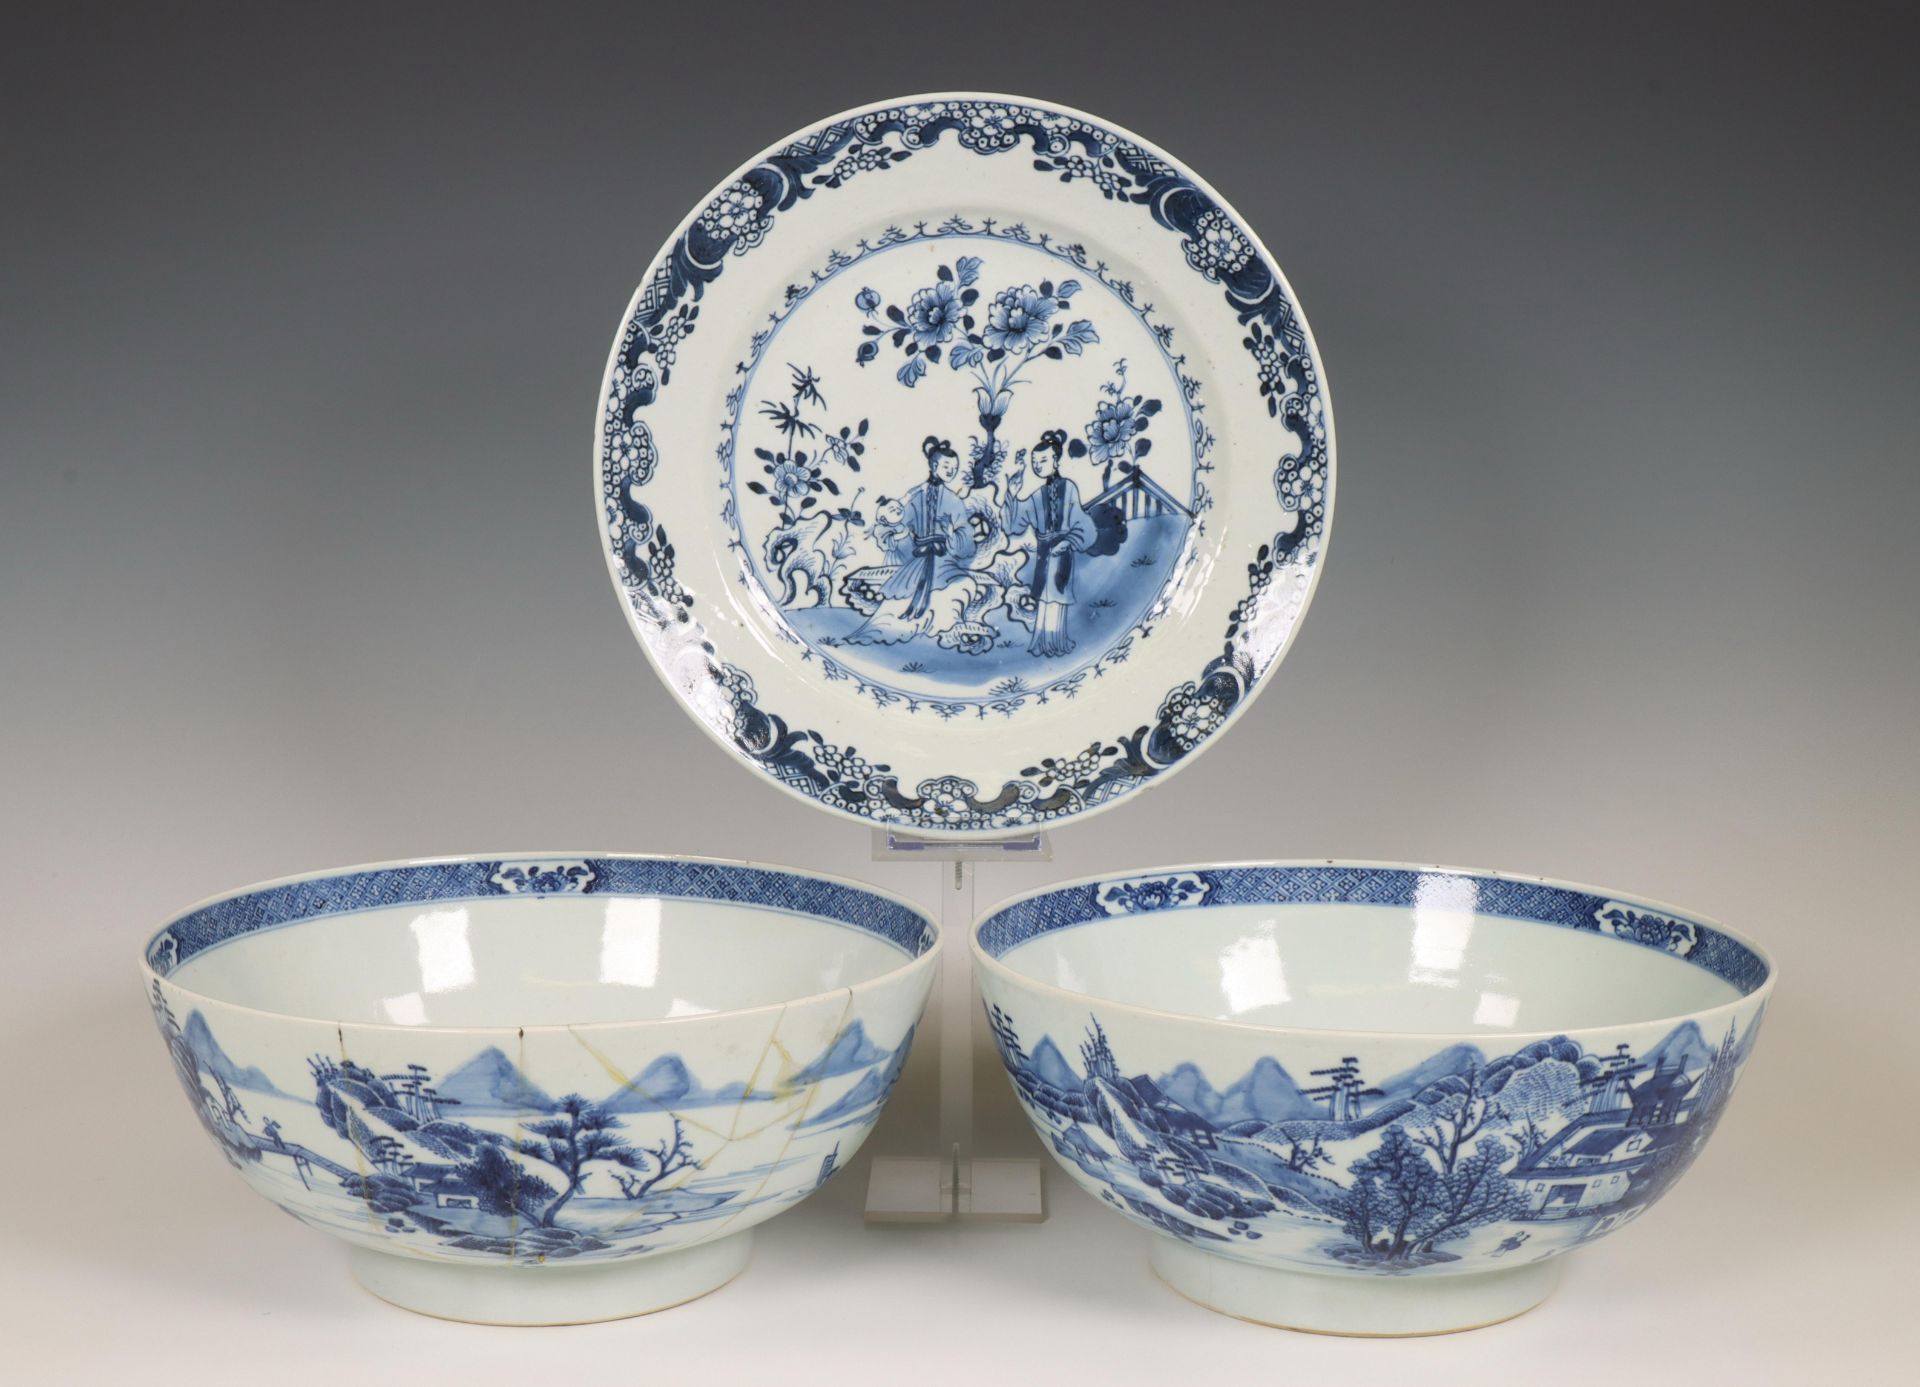 China, a pair of blue and white porcelain bowls and a dish, late 18th century,